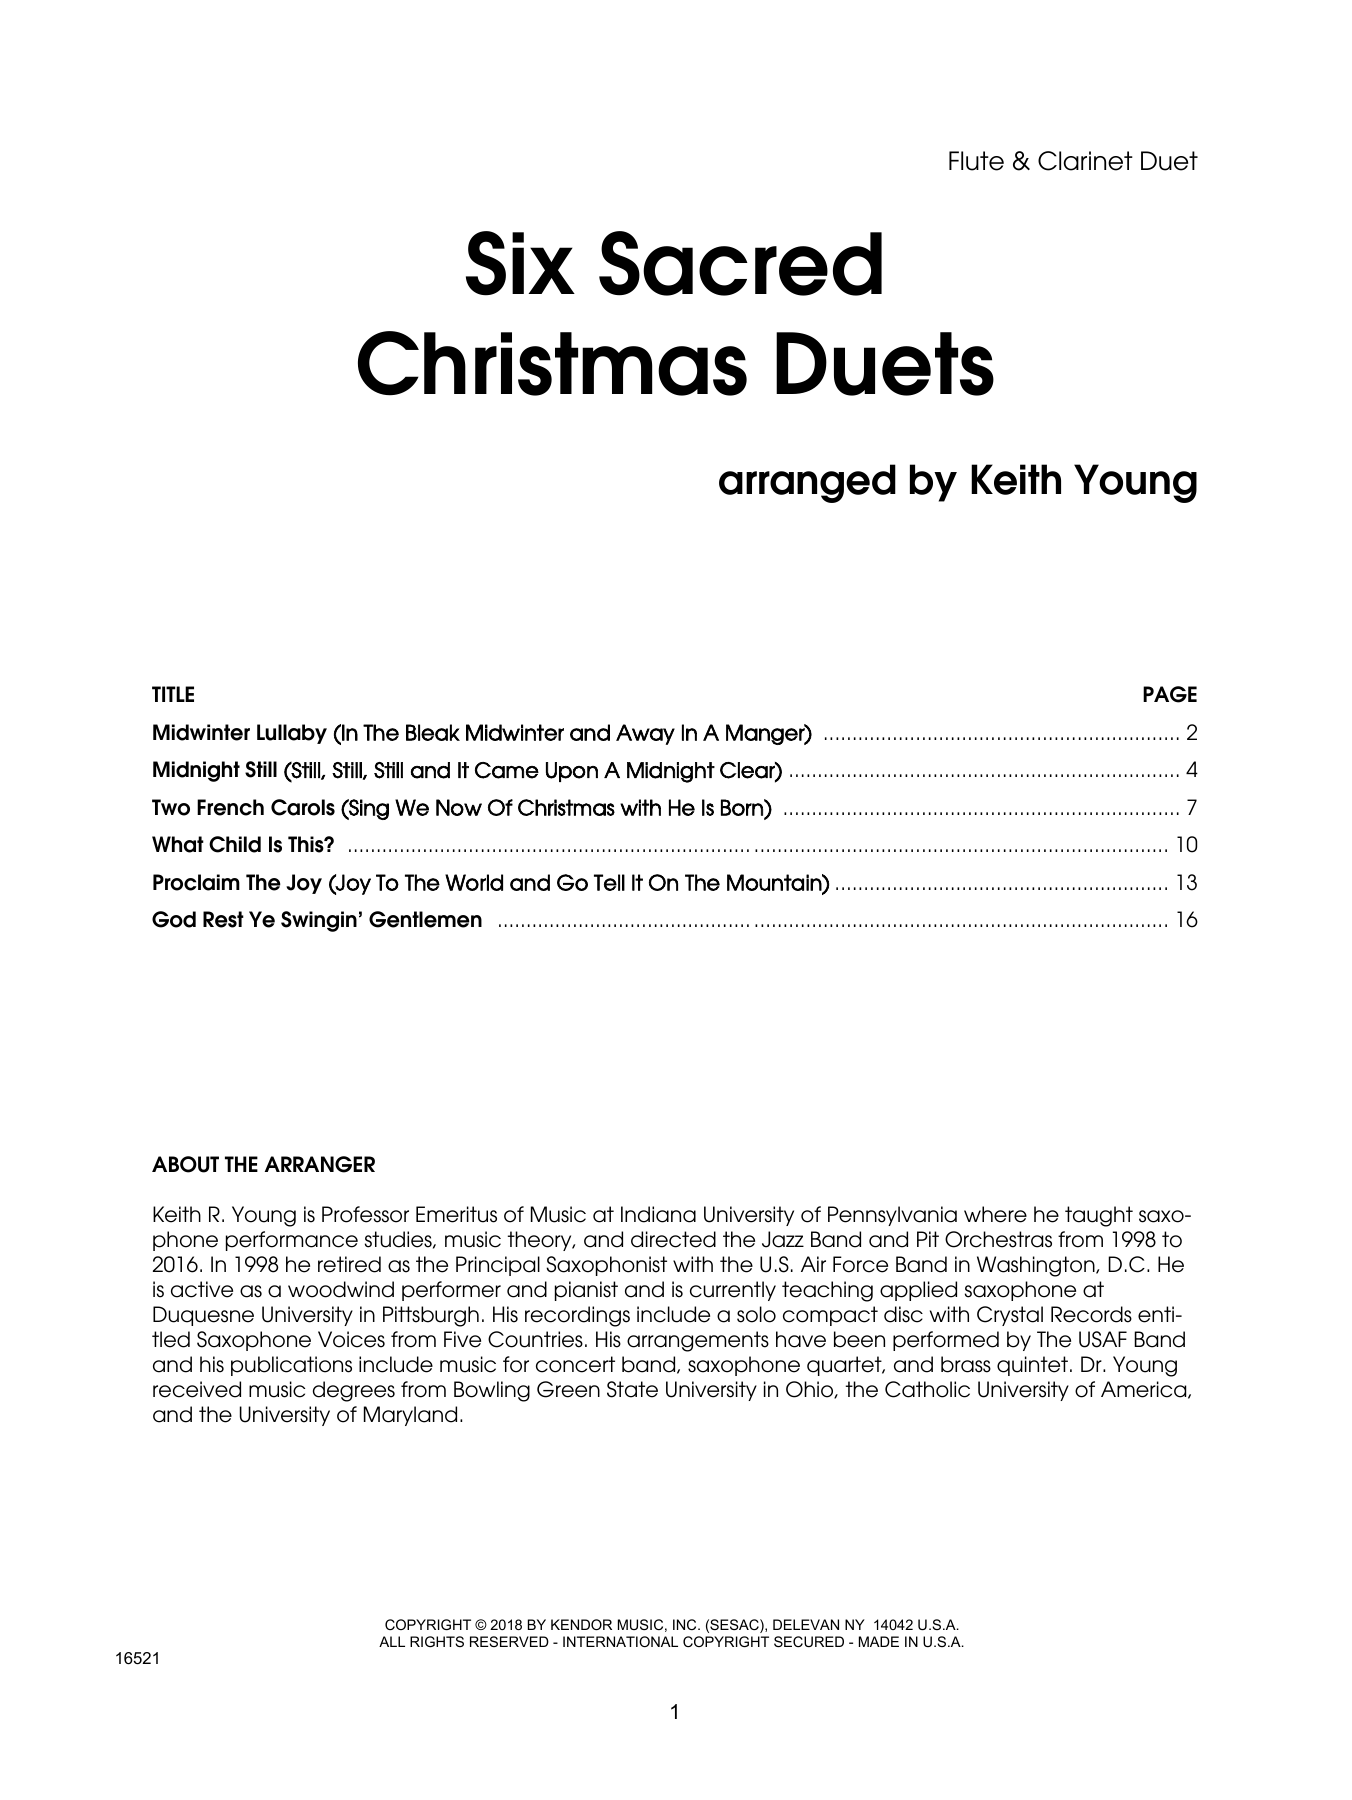 Download Keith Young Six Sacred Christmas Duets - Clarinet/F Sheet Music